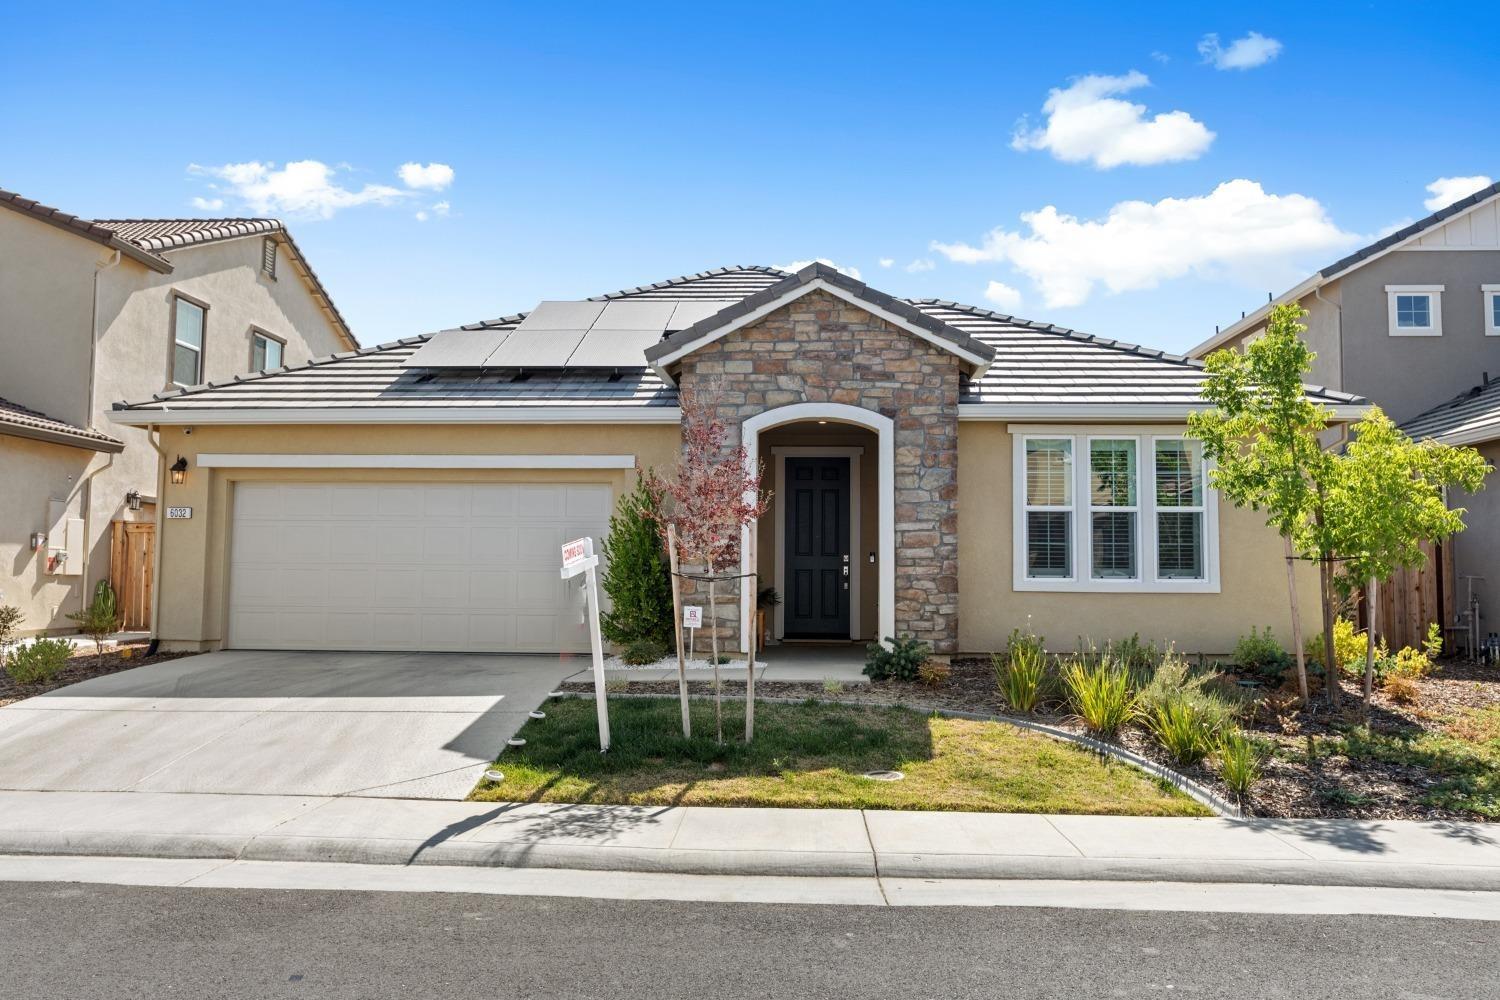 Photo of 6032 Summerwind Dr in Roseville, CA